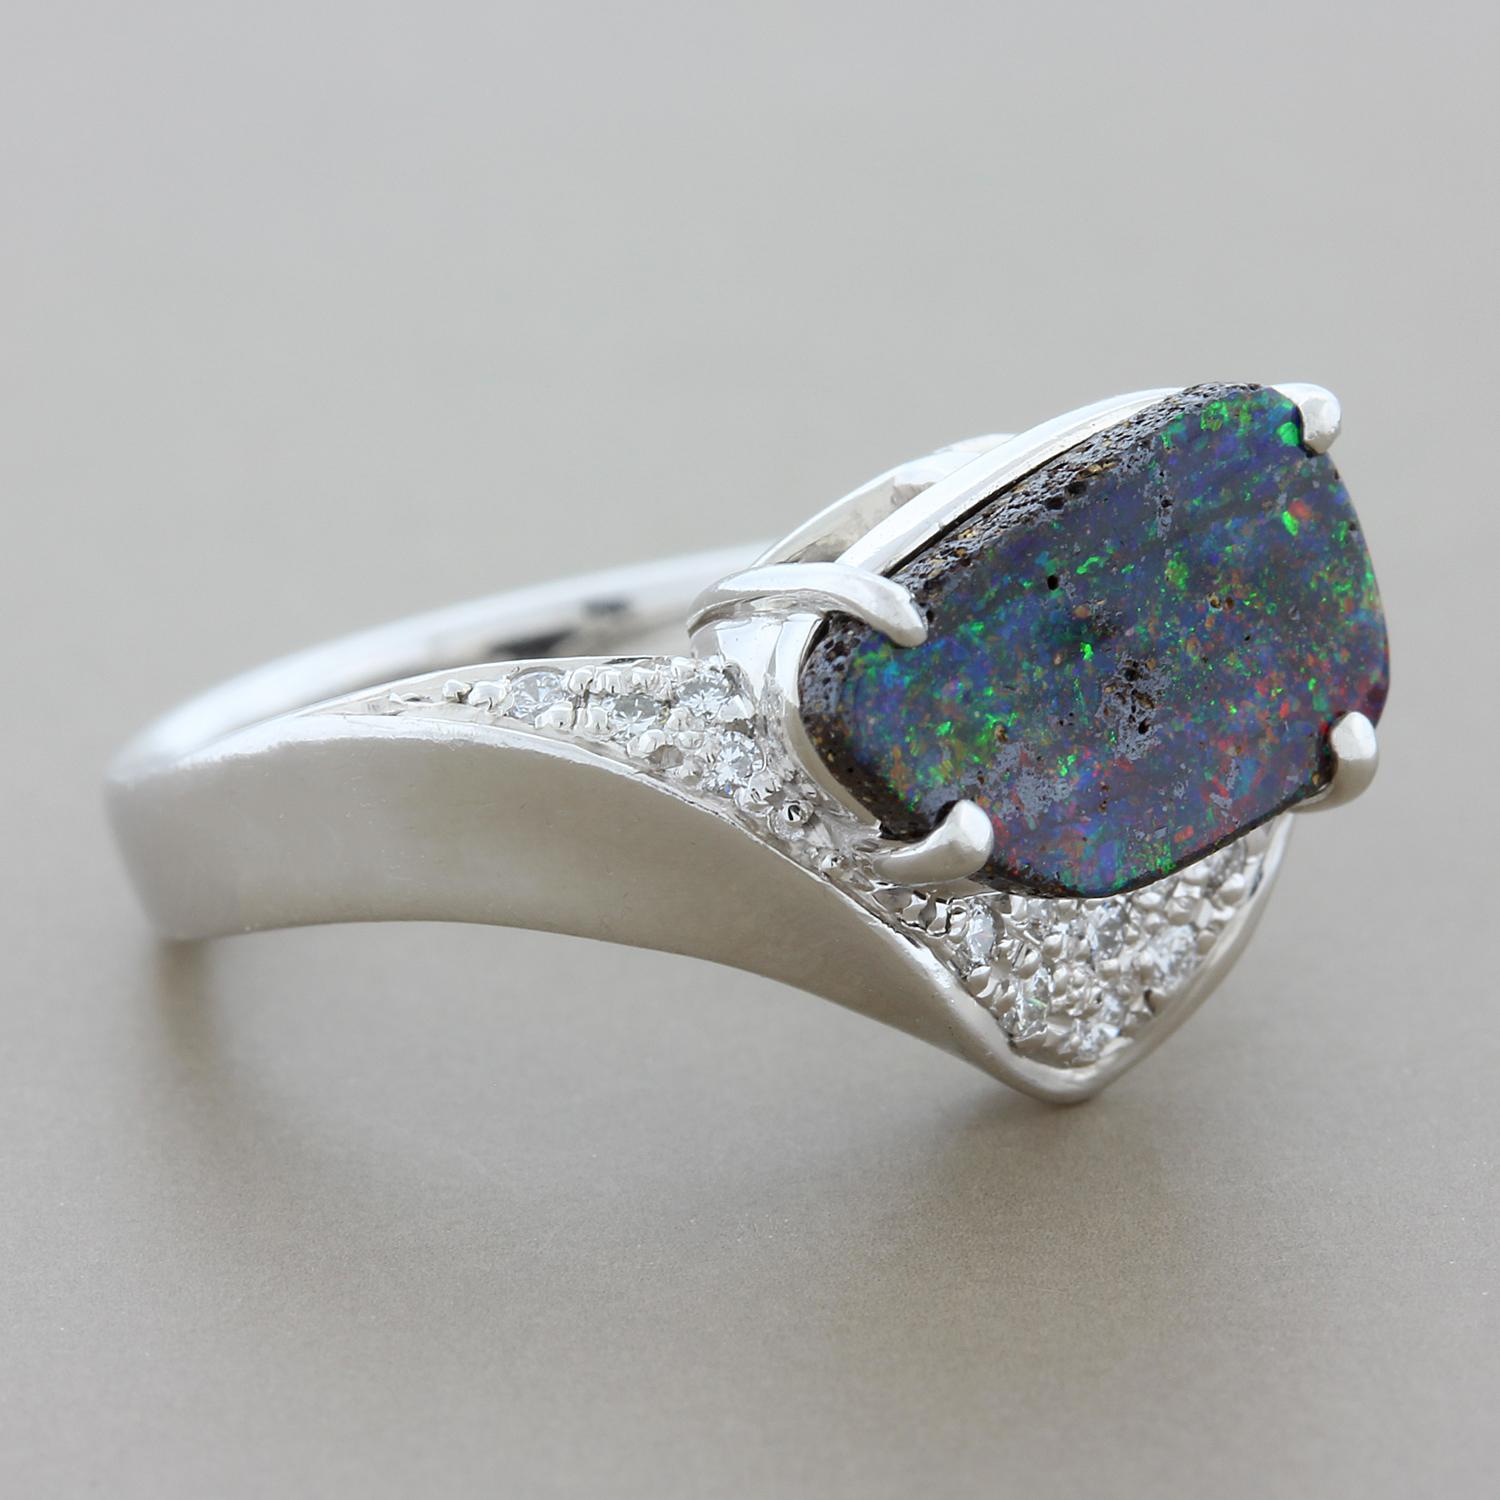 A top gem quality 2.23 carat boulder opal with exceptional play of color showing strong flashes of reds and other colors. It is accented by 0.14 carats of round cut diamonds pave set in platinum. A ring for someone who appreciates fine quality